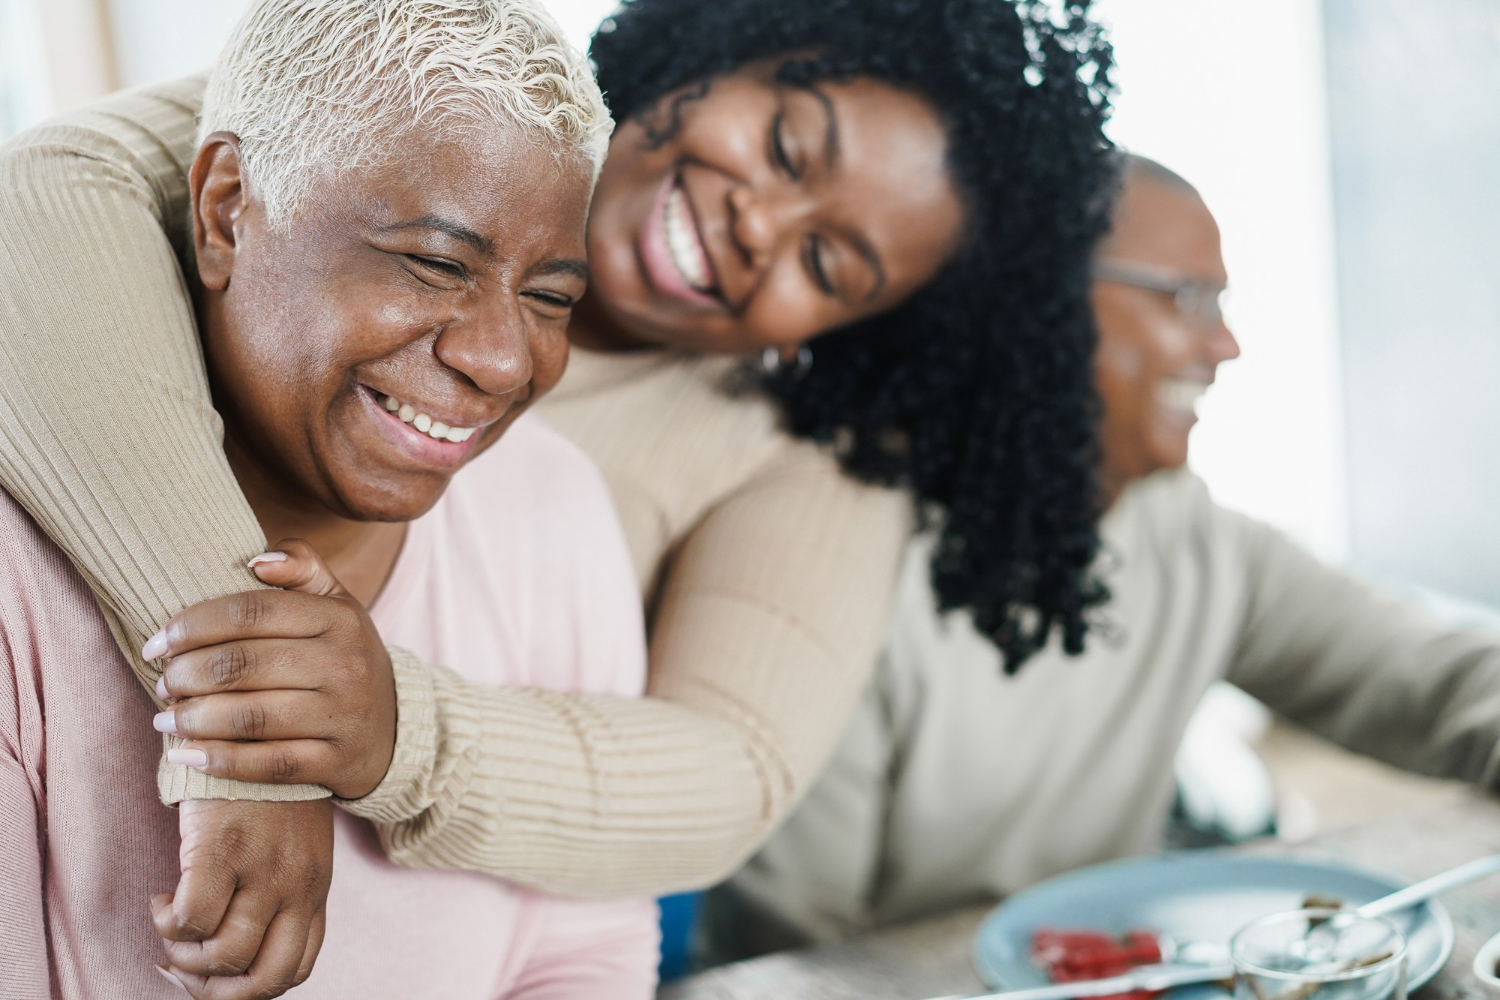 african-daughter-hugging-her-mum-during-lunch-meal-home-love-family-concept-main-focus-senior-woman-face.jpg